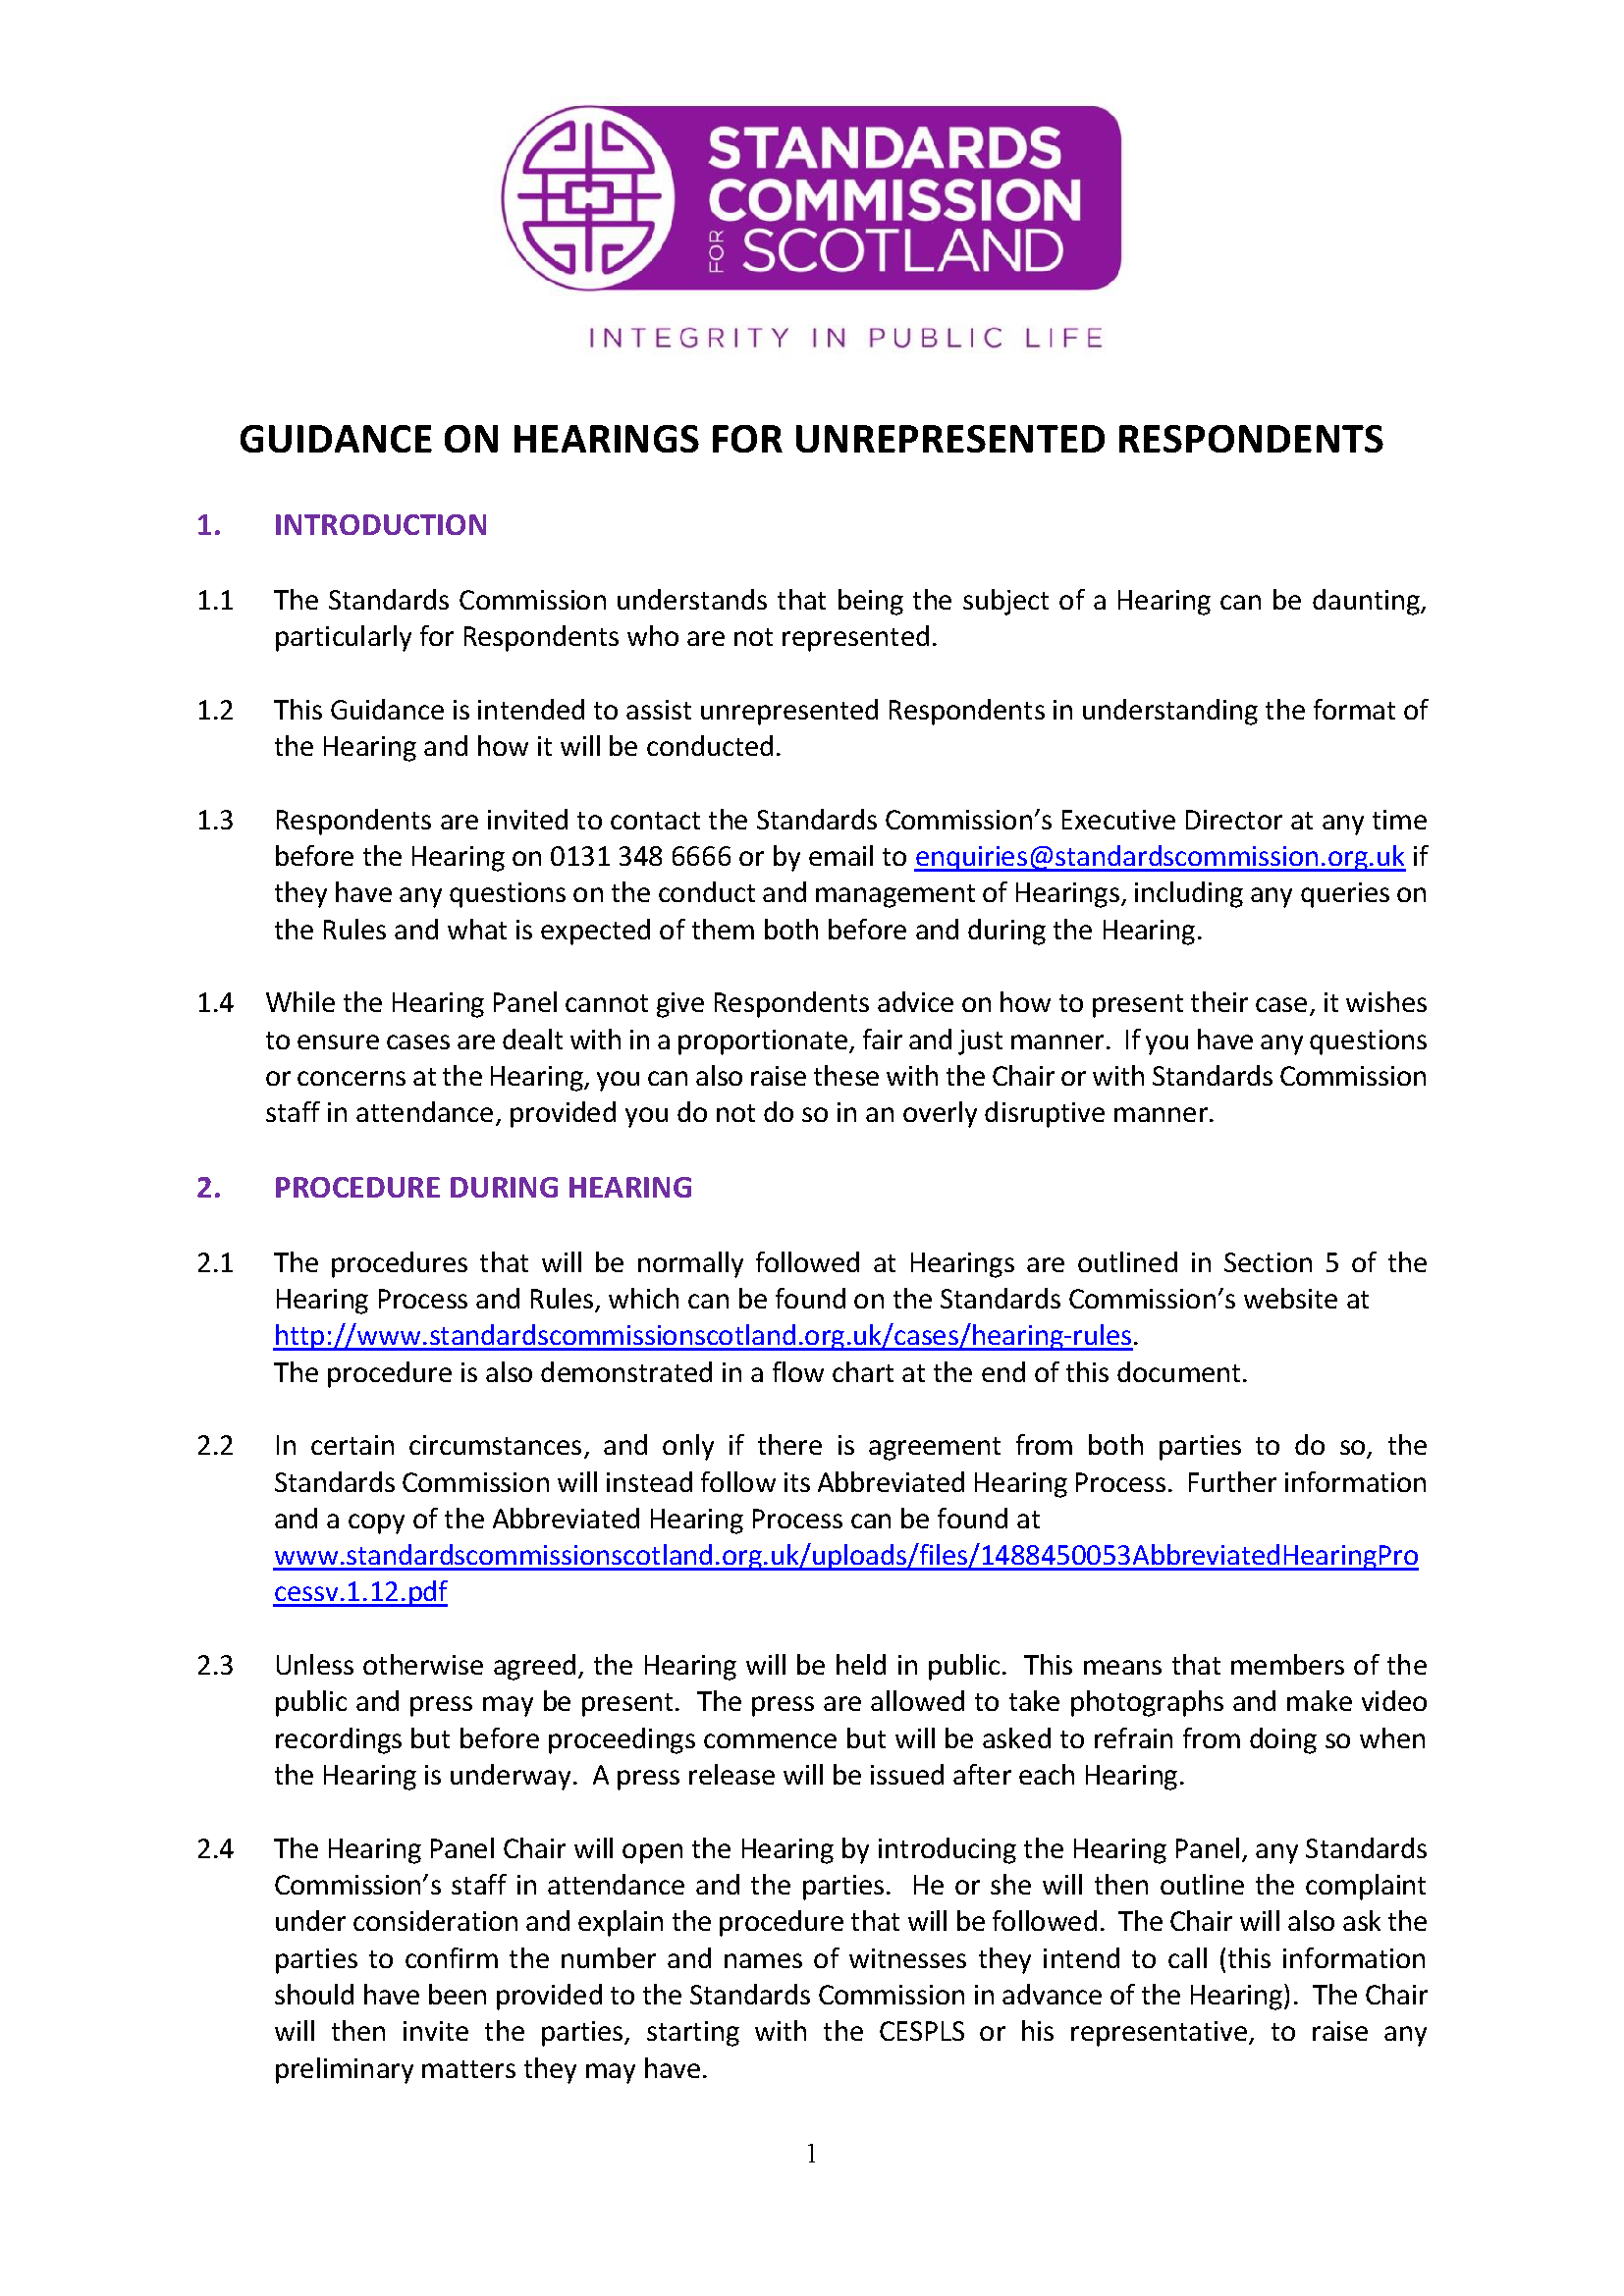 Guidance for Unrepresented Respondents